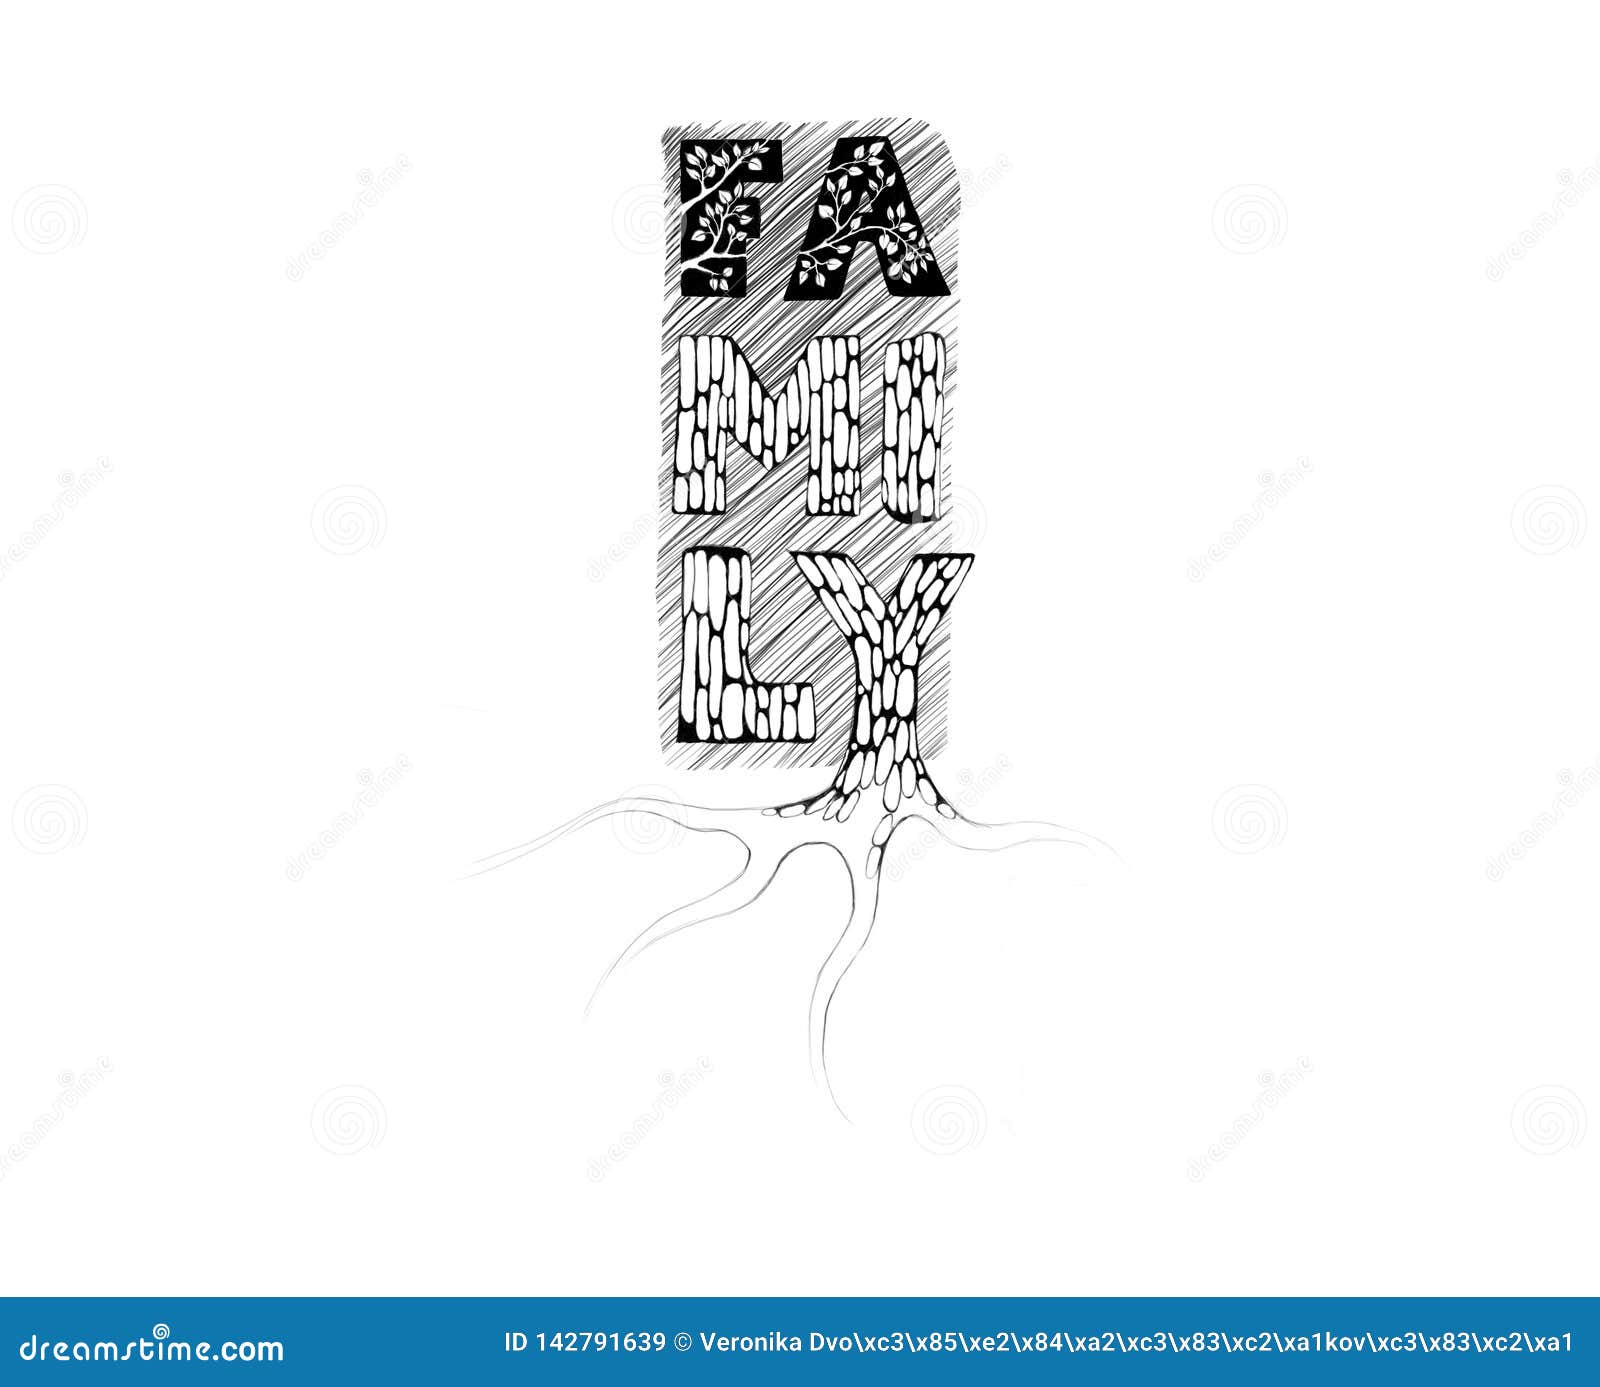 Art design decorative word space doodle sketch style vector hand drawing  letters with a pattern of space doodle creative  CanStock